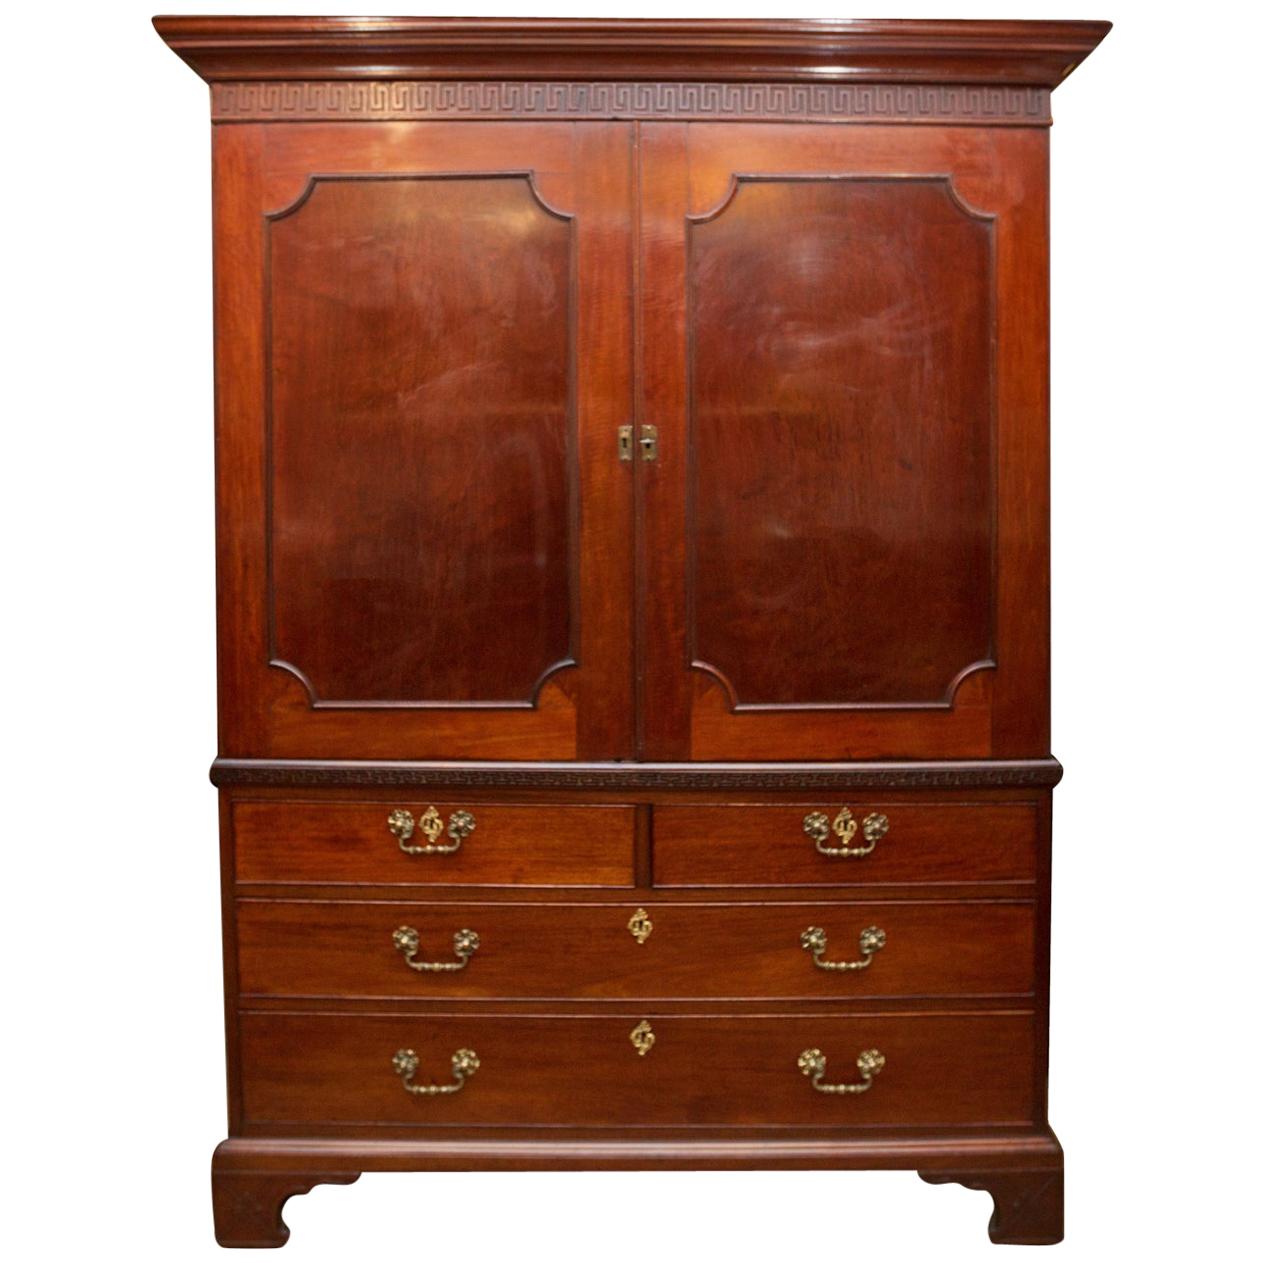 18th Century George III Mahogany Linen Cupboard in the Manner of Chippendale